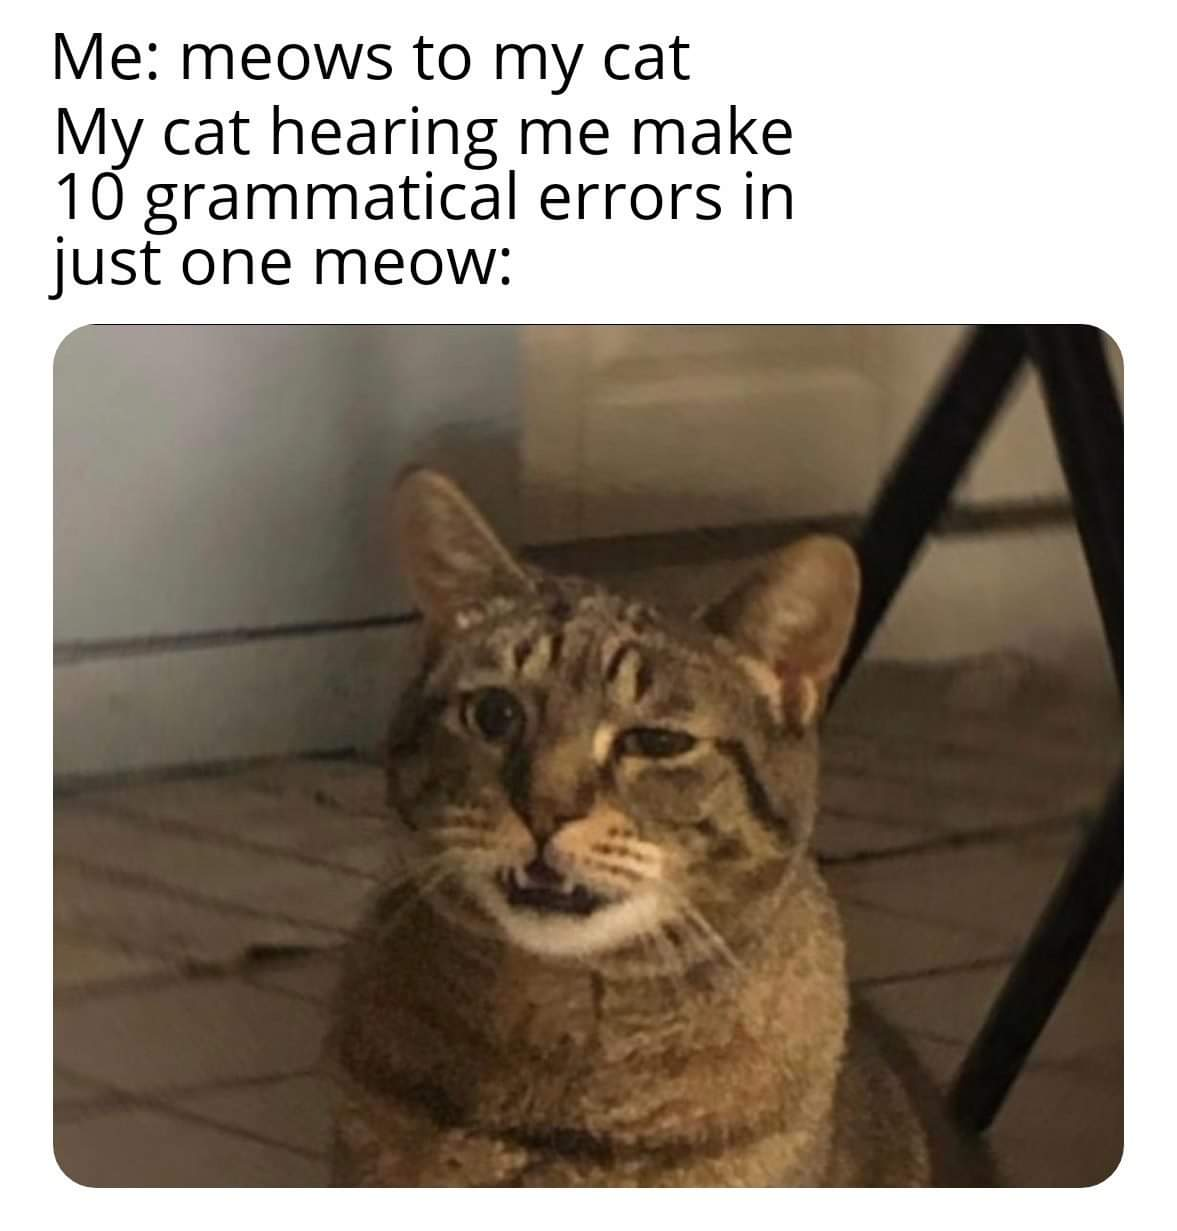 Meow - Me meows to my cat My cat hearing me make 10 grammatical errors in just one meow